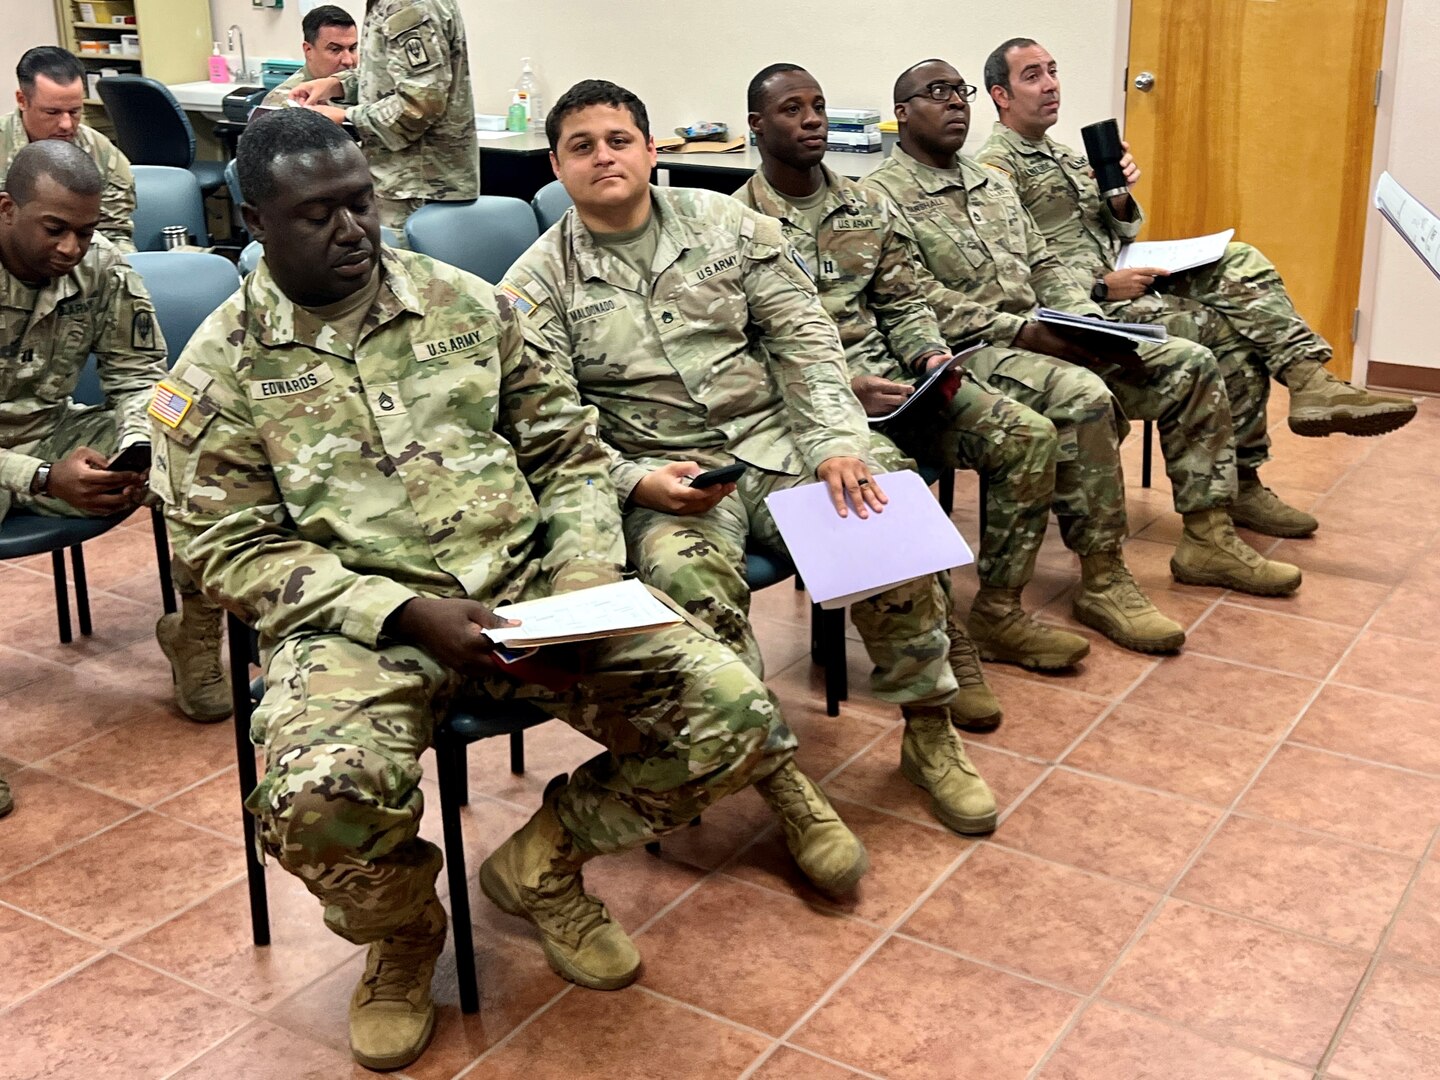 Group of Soldiers sitting in a hospital waiting room.